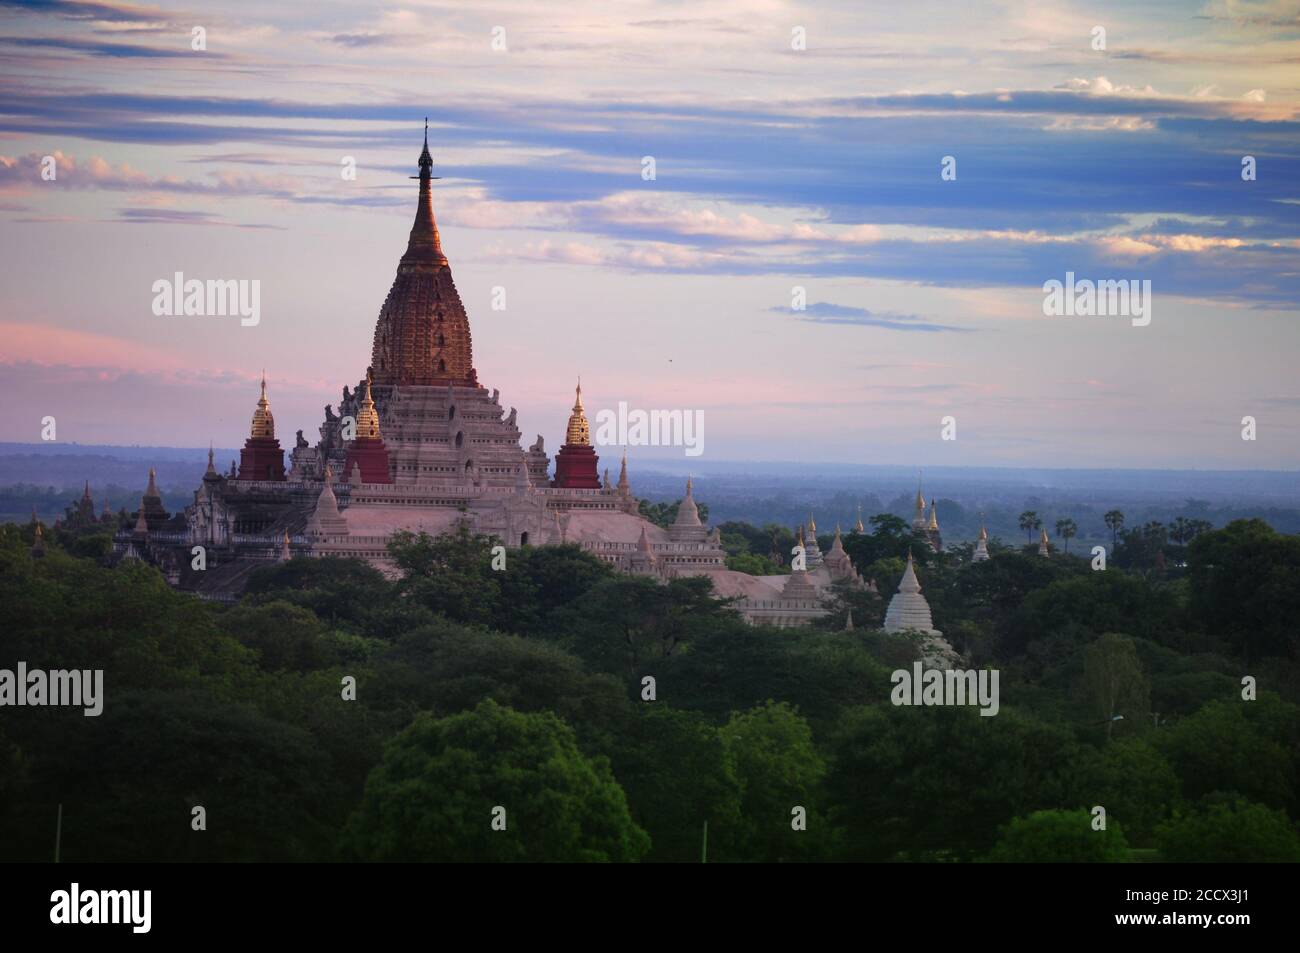 The aerial view of Ananda Temple in Old Bagan surrounded by lush trees and sky background Stock Photo